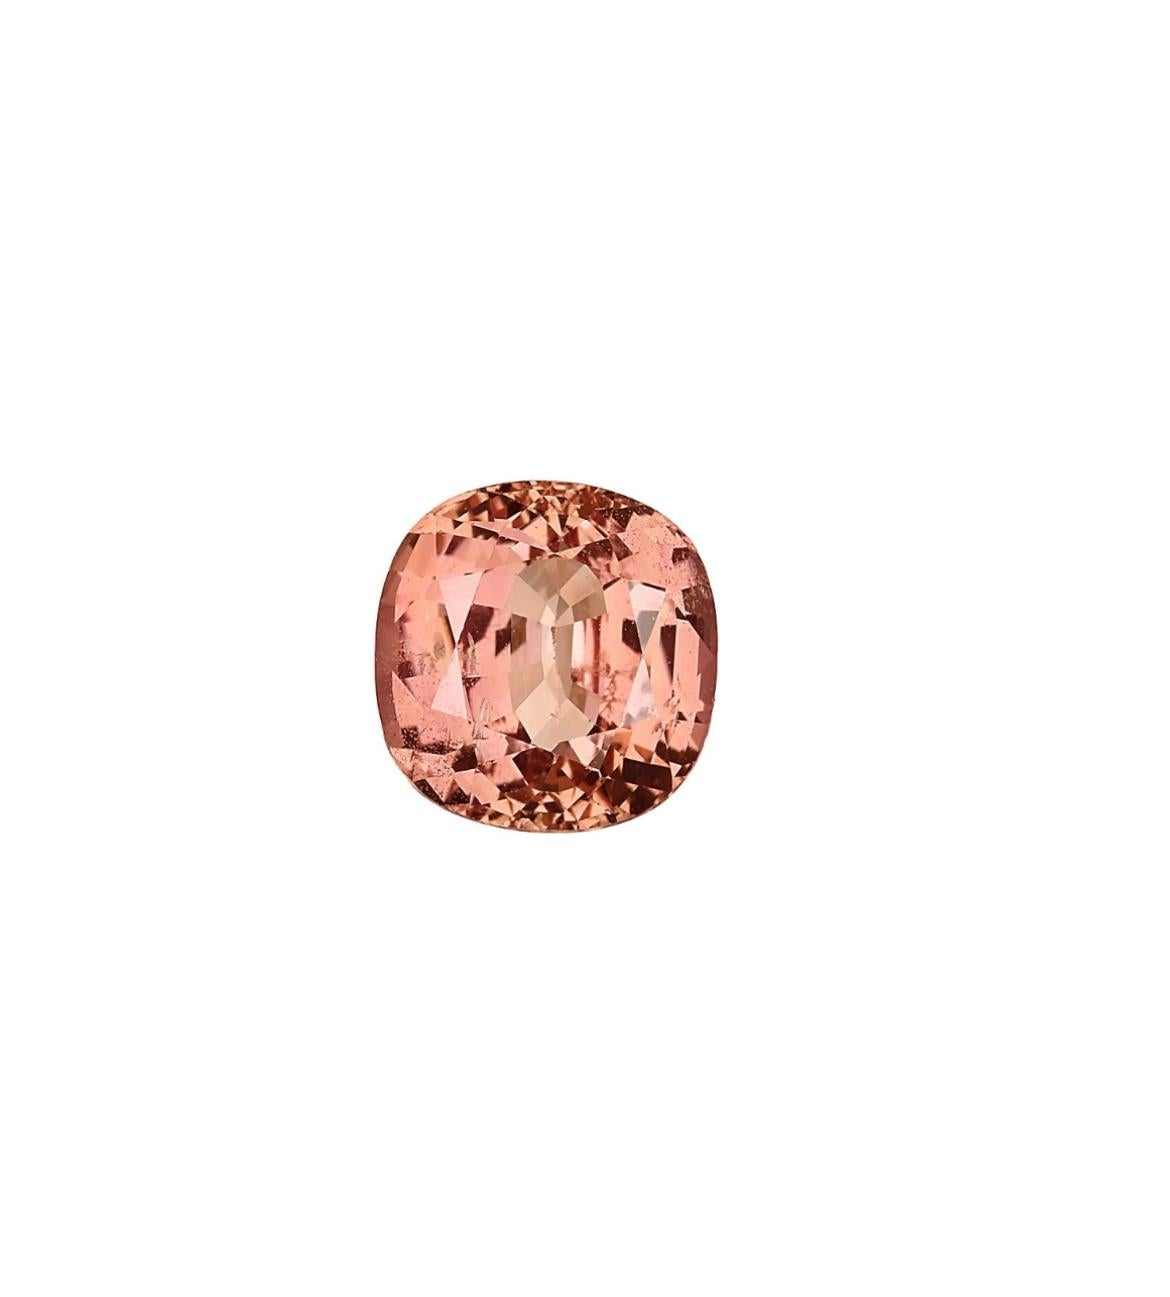 A 2.57-carat Padparadscha Sapphire displays a delicate pinkish-orange color for which these stones are so coveted. Highlighted by six baguette diamonds totaling 0.33 carats. The awe-inspiring Sapphire is nestled in 18K rose gold with platinum and